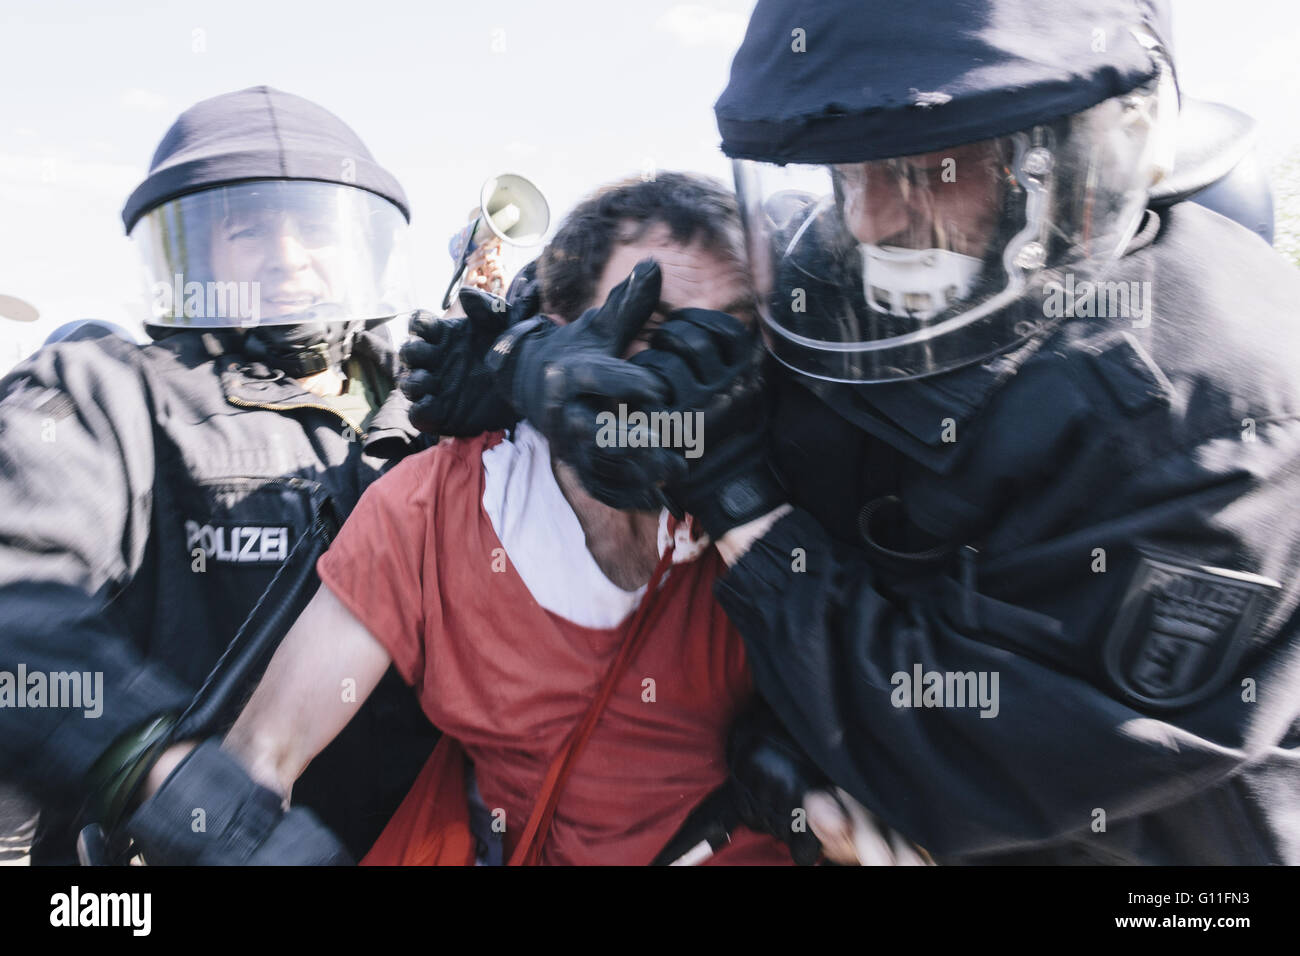 Berlin, Germany. 7th May, 2016. An activist is arrested by the police during the counter protests against rally held under the motto 'Merkel muss weg![Merkel must go]' organised by far-right group 'We for Berlin & We for Germany' Credit:  Jan Scheunert/ZUMA Wire/Alamy Live News Stock Photo